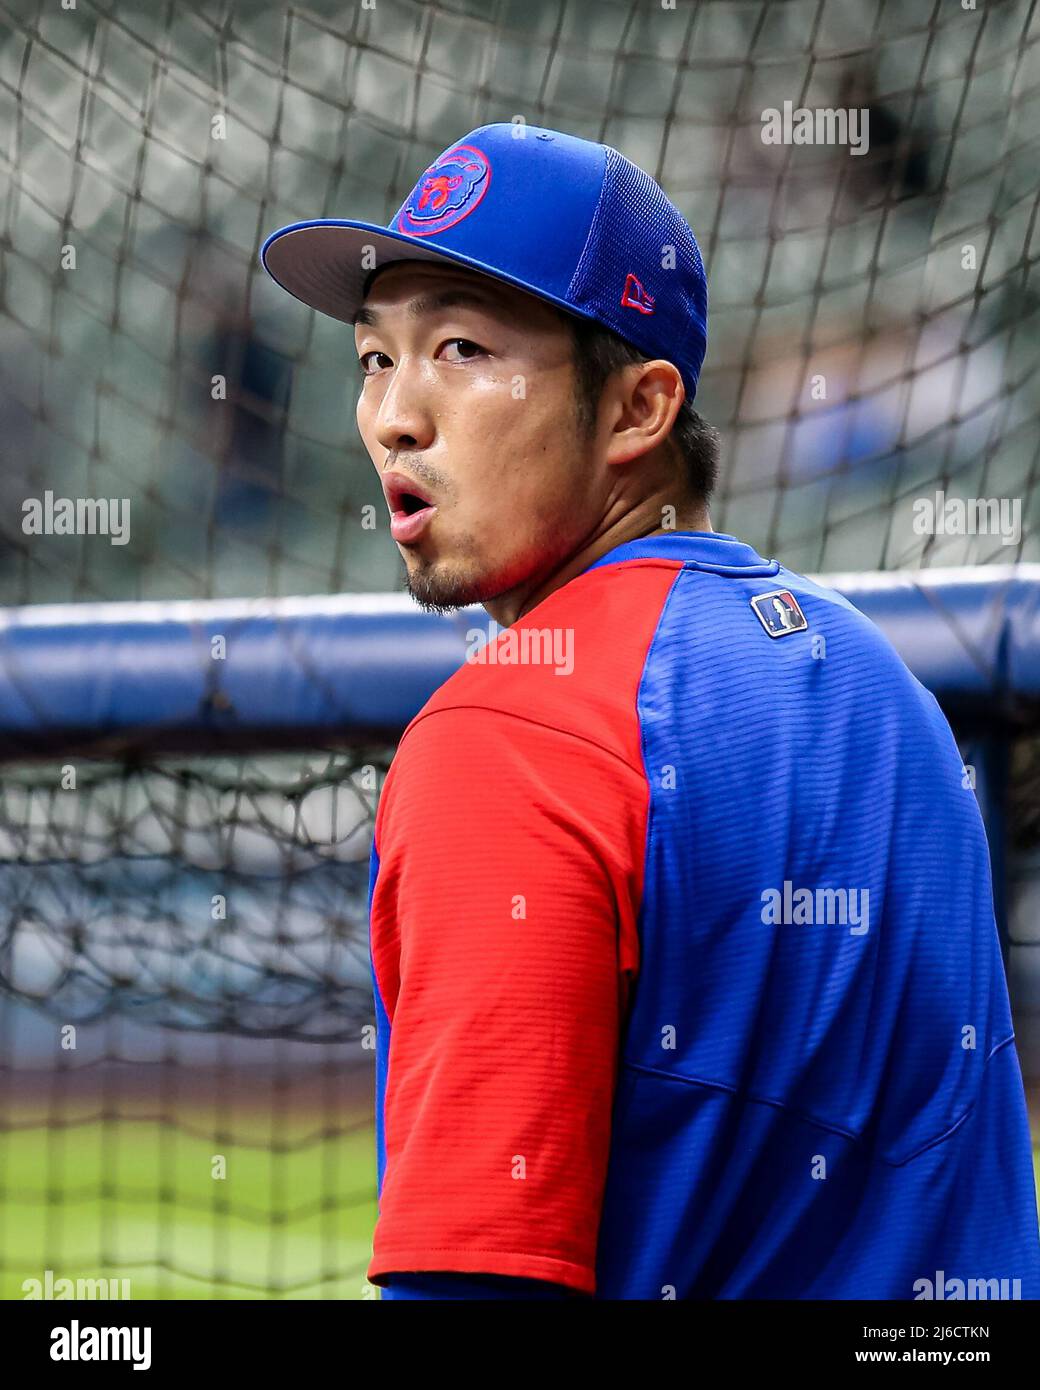 April 29, 2022 - Chicago Cubs right fielder Seiya Suzuki (27) waits his  turn during pregame batting practice before their MLB Baseball game at  Milwaukee at Miller Park in Milwaukee, WI Stock Photo - Alamy